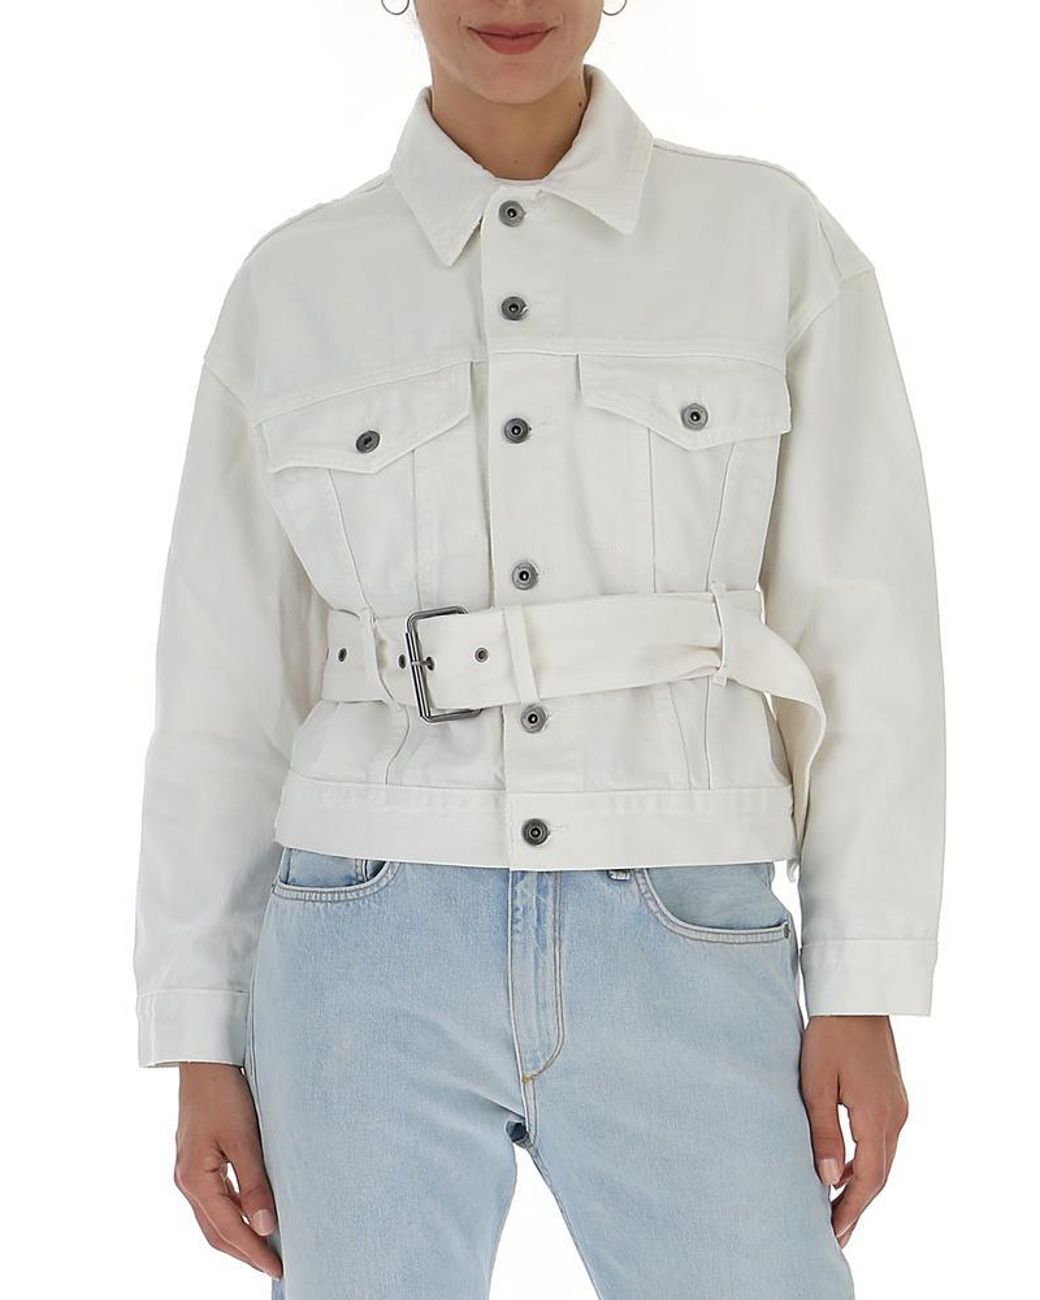 Proenza Schouler Pswl Belted Denim Jacket in White - Save 70% - Lyst